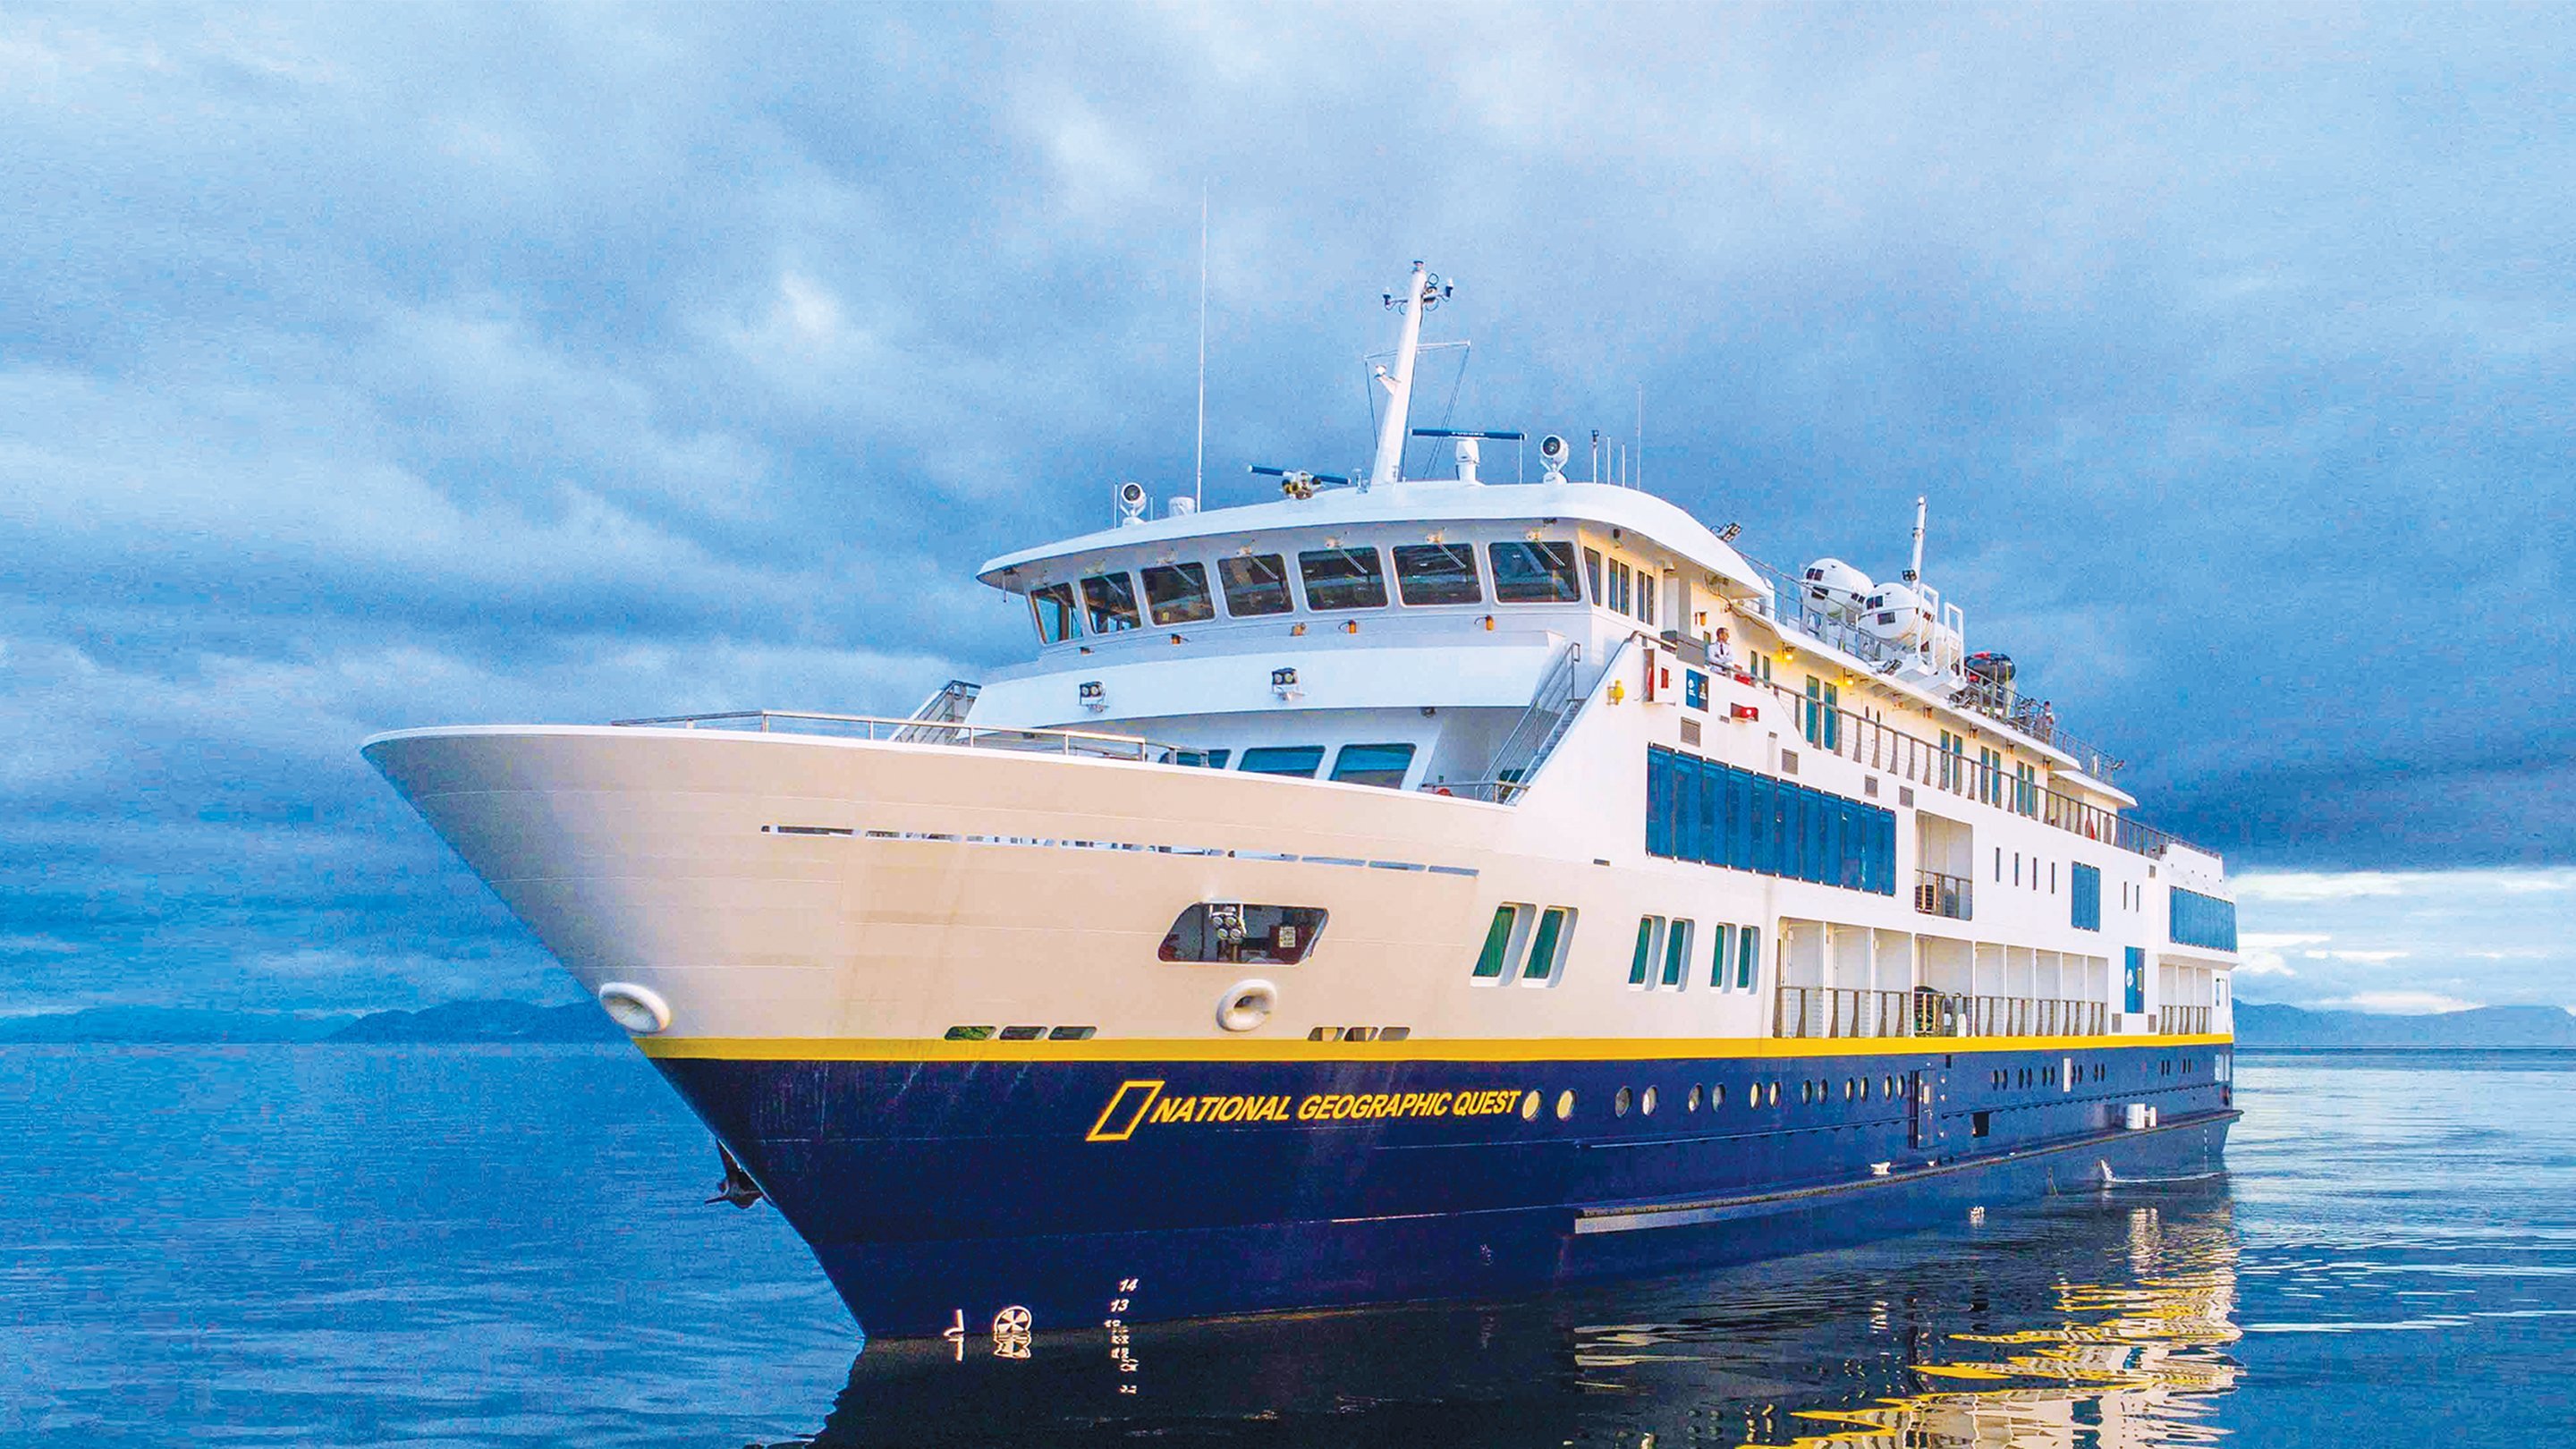 National Geographic Quest Lindblad Expeditions